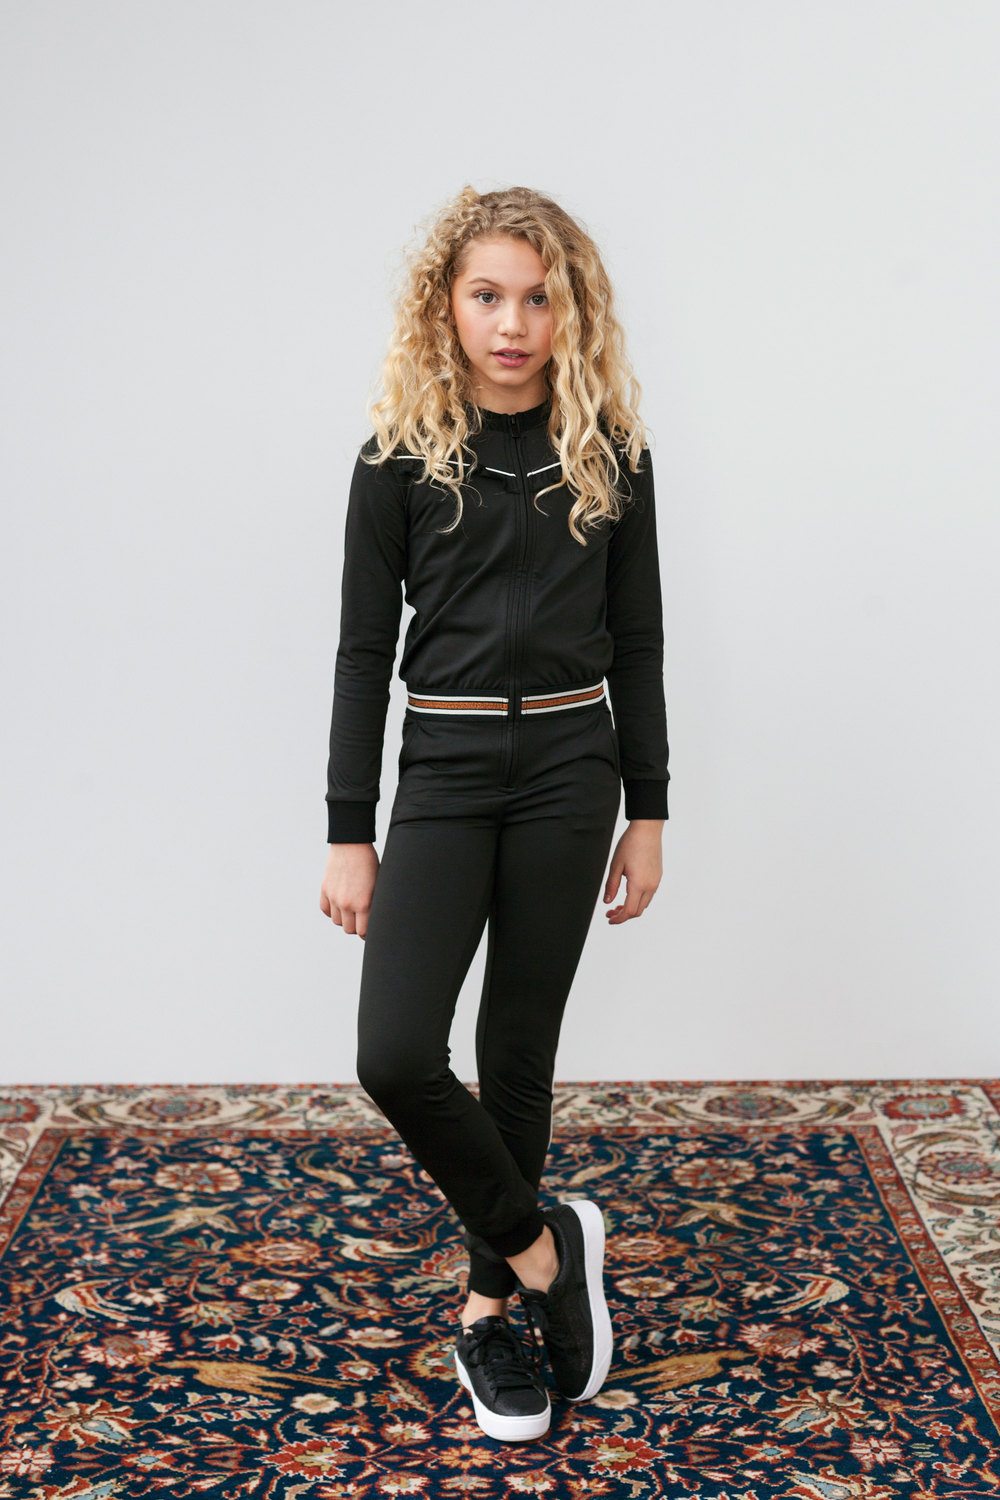 Looxs Girls sporty jumpsuit